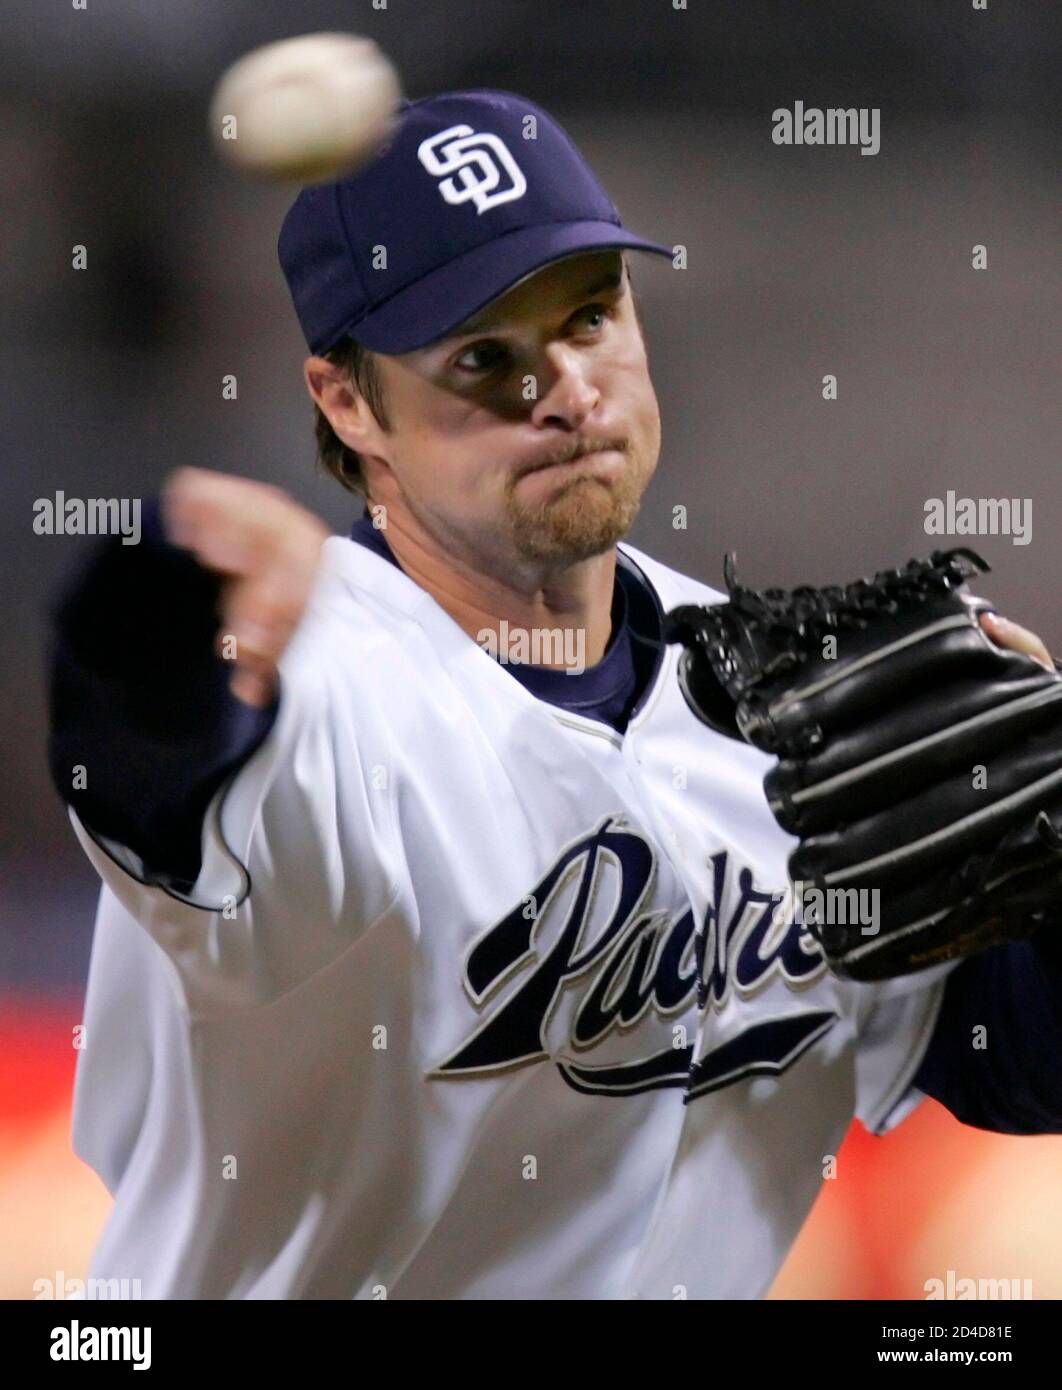 San Diego Padres starting pitcher Brian Lawrence pitches to the San Francisco Giants in the eighth inning during the National League baseball at Petco Park in San Diego April 19, 2005. Lawrence picked up the win going eight innings, giving up two runs on six hits for a 5-2 Padres victory over the Giants. REUTERS/Mike Blake  MB/DH Stock Photo